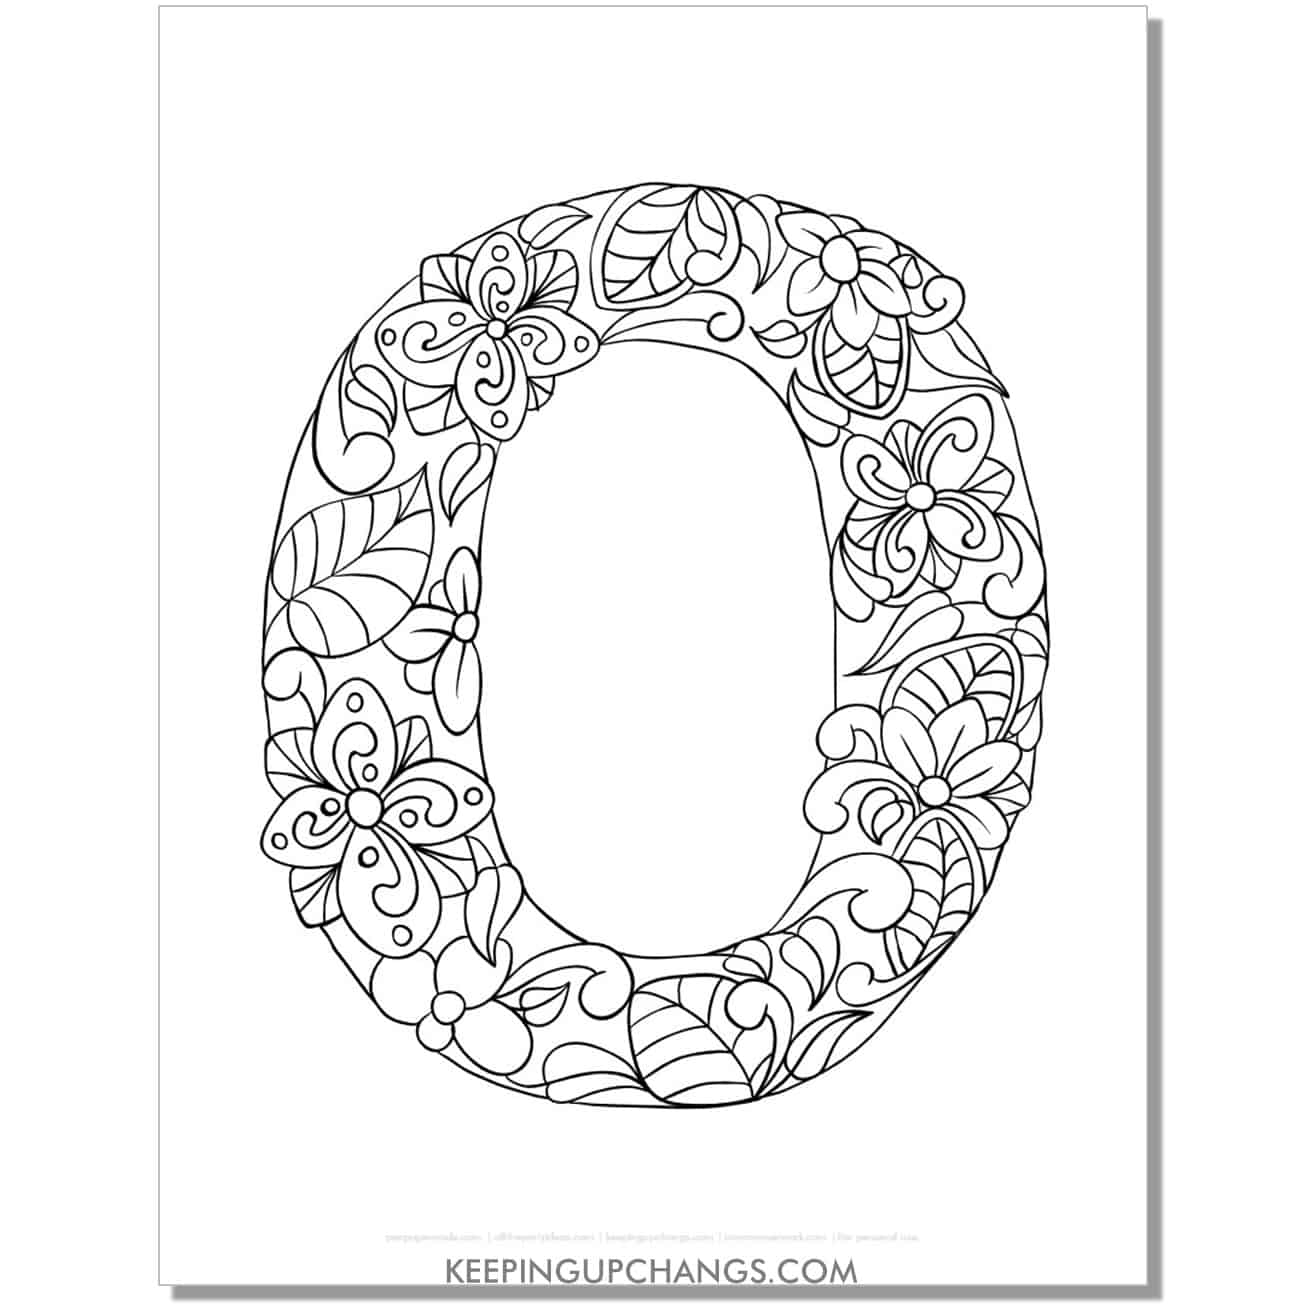 free abc o to color, complicated mandala zentangle for adults.